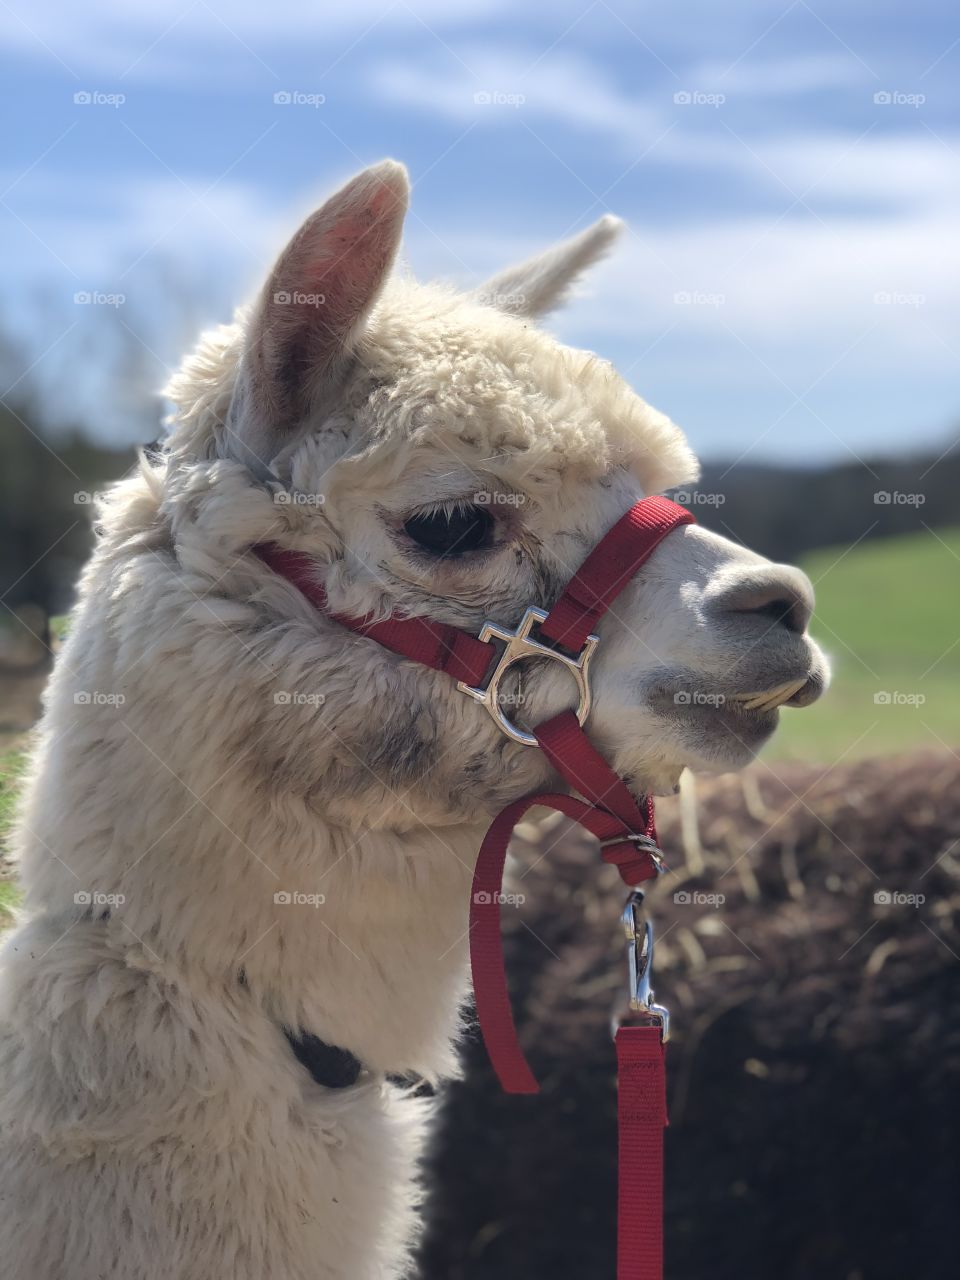 This is my grandmas Alpaca his name is Prince! He is a beautiful cream color and he gives off a sense of royalty.